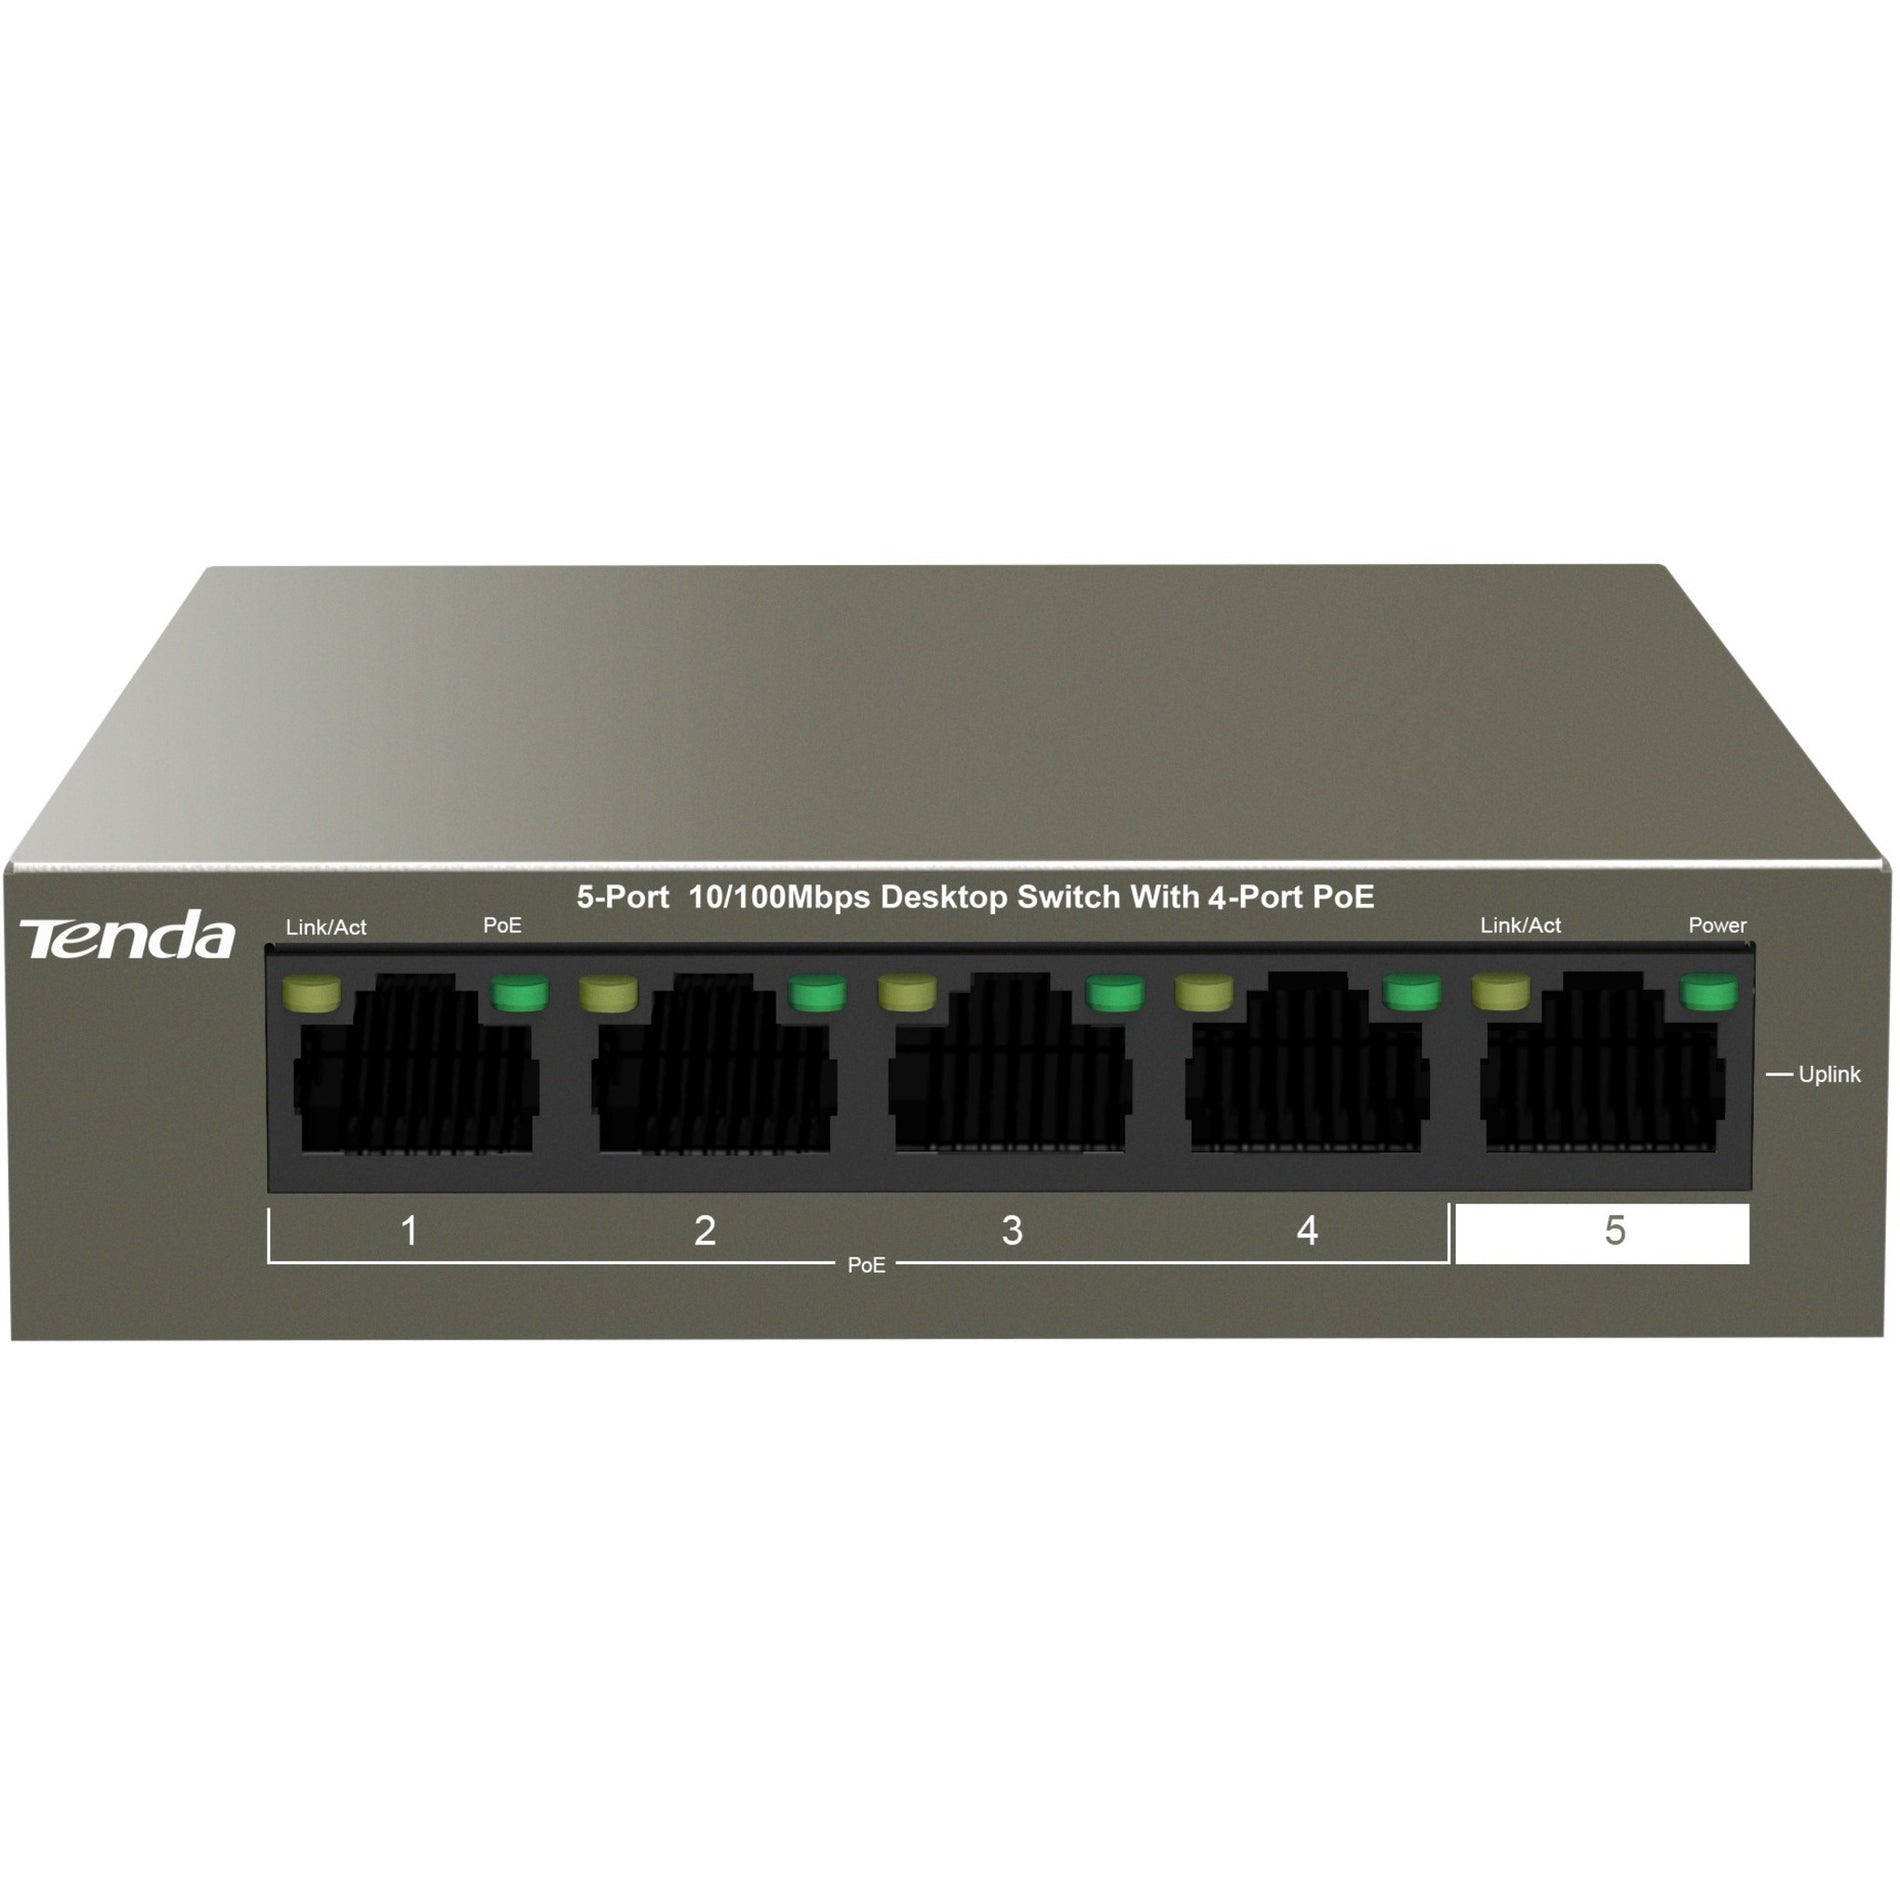 Tenda TEF1105P-4-63W 5-Port 10/100Mbps Desktop Switch With 4-Port PoE, AC Adapter Included